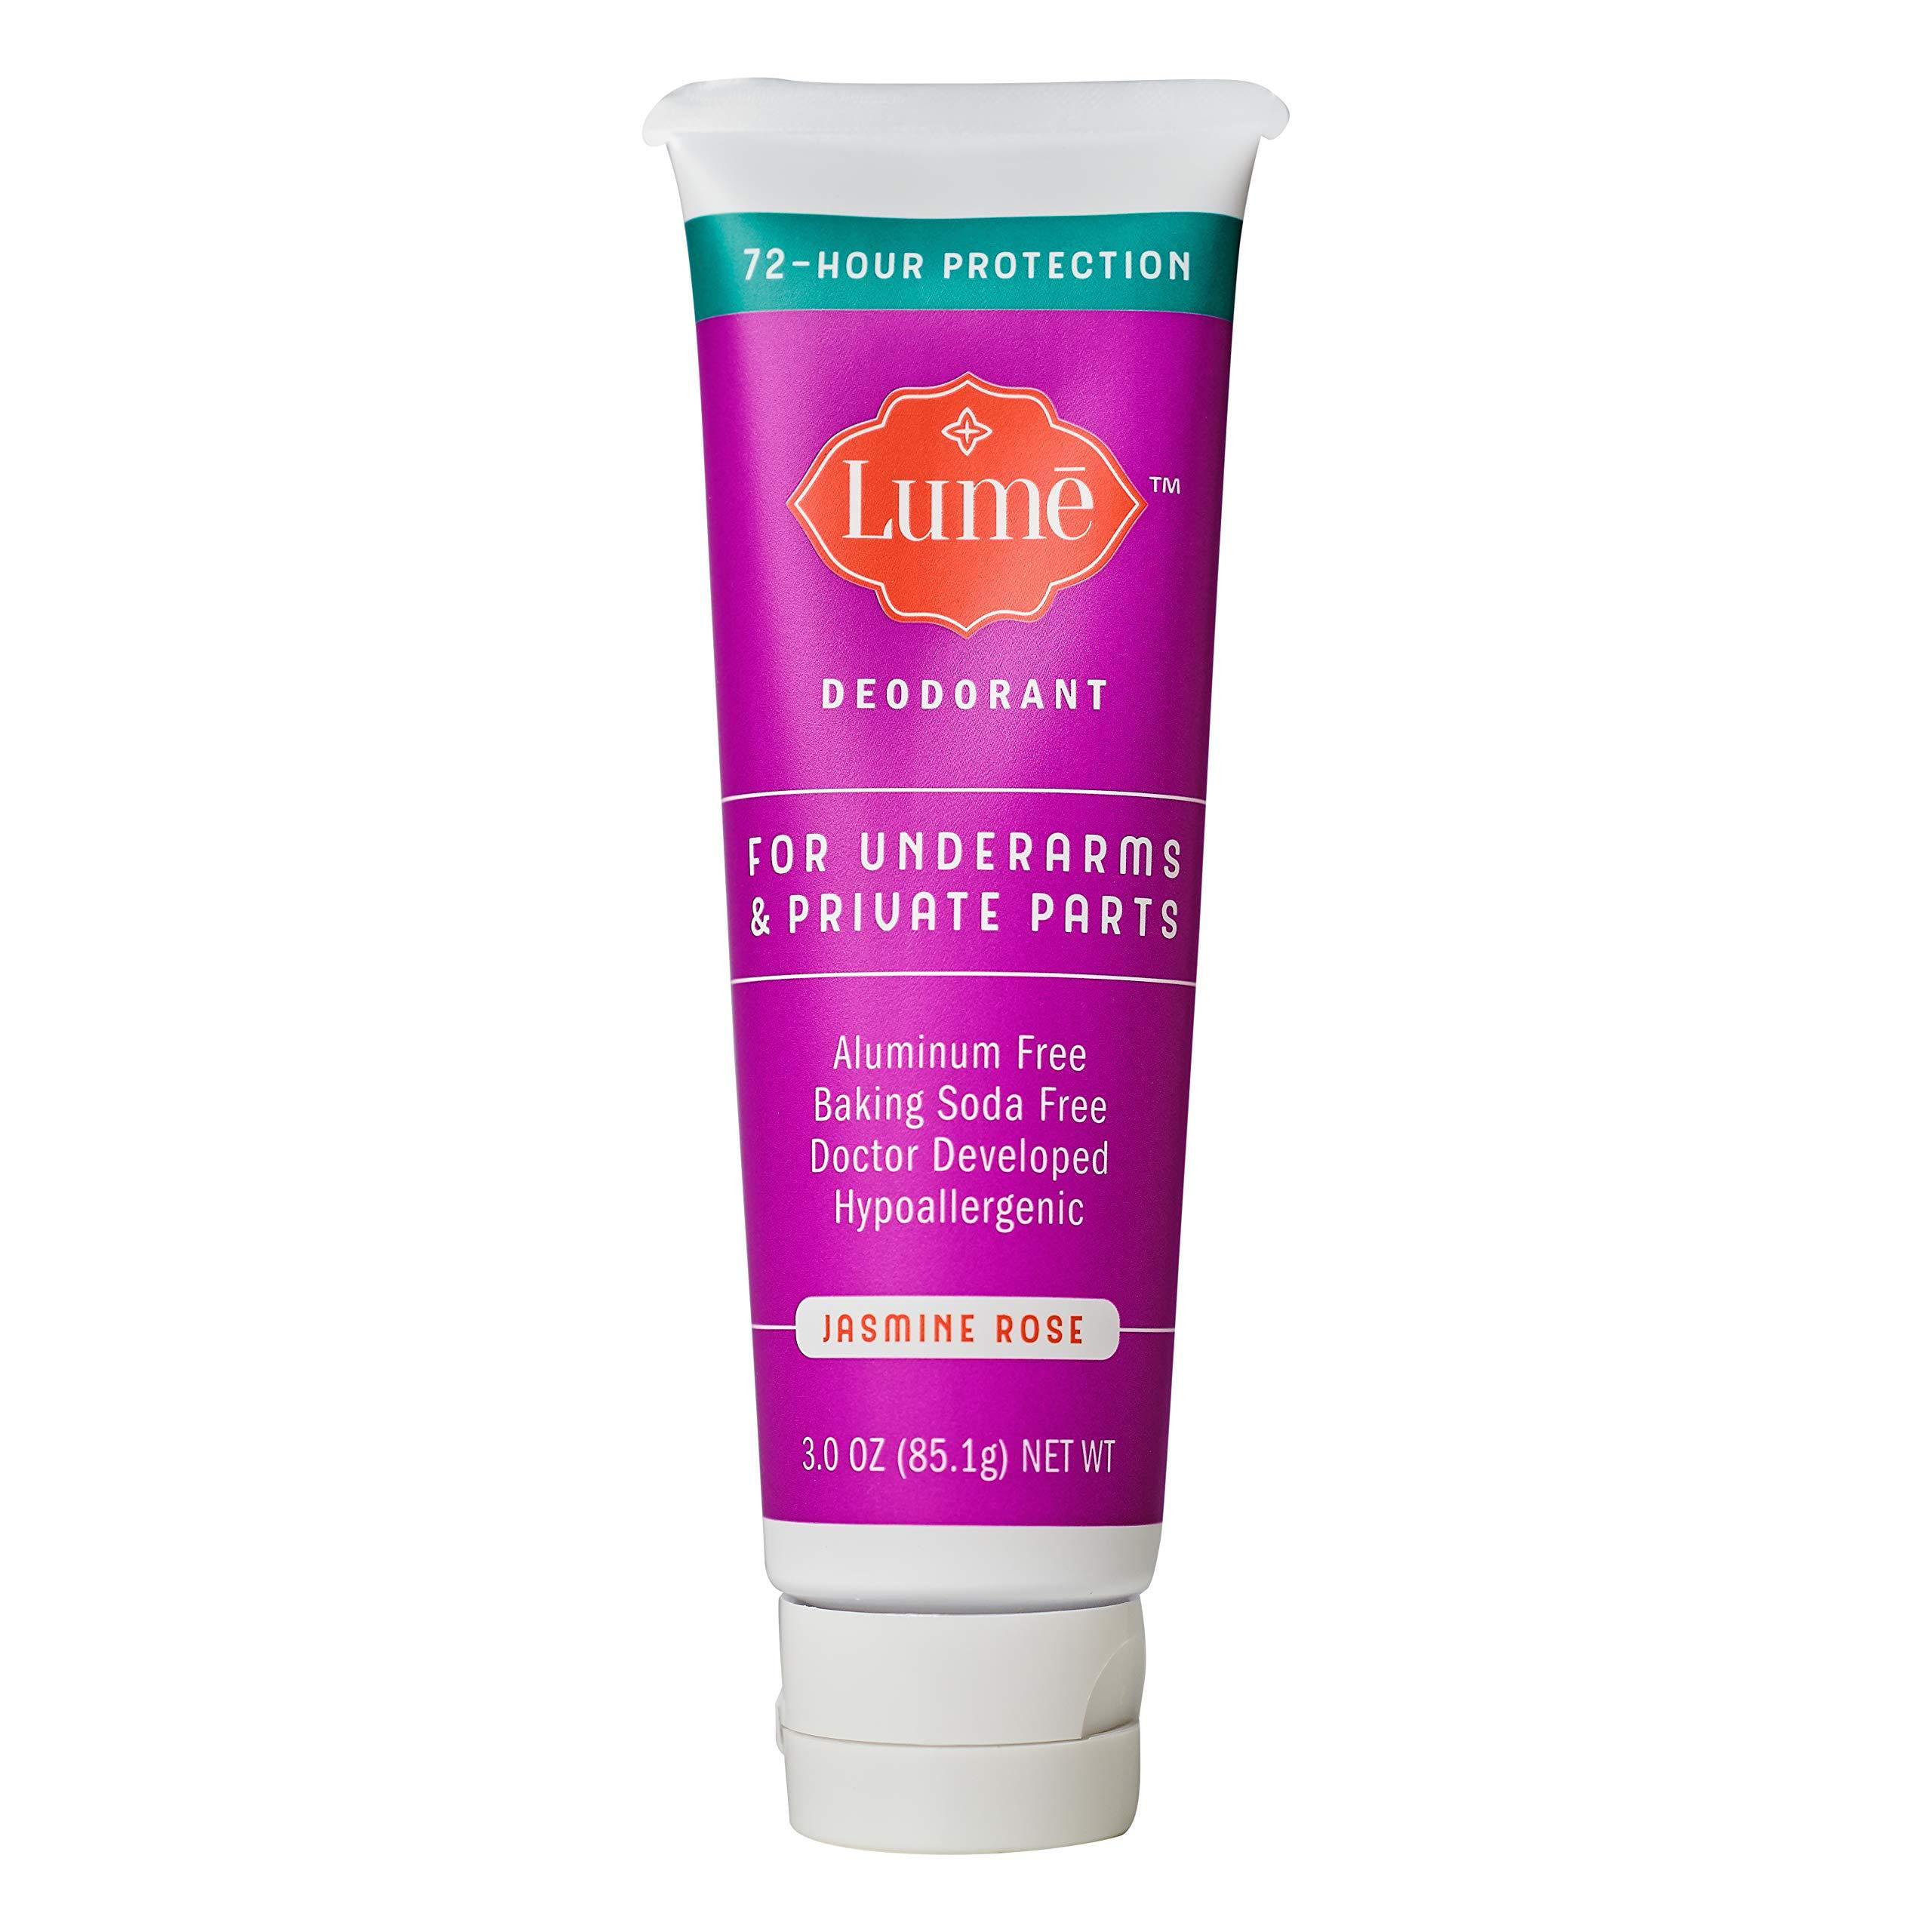 Lume Deodorant For Underarms & Private Parts 3oz Tube - Heat exchanger ...